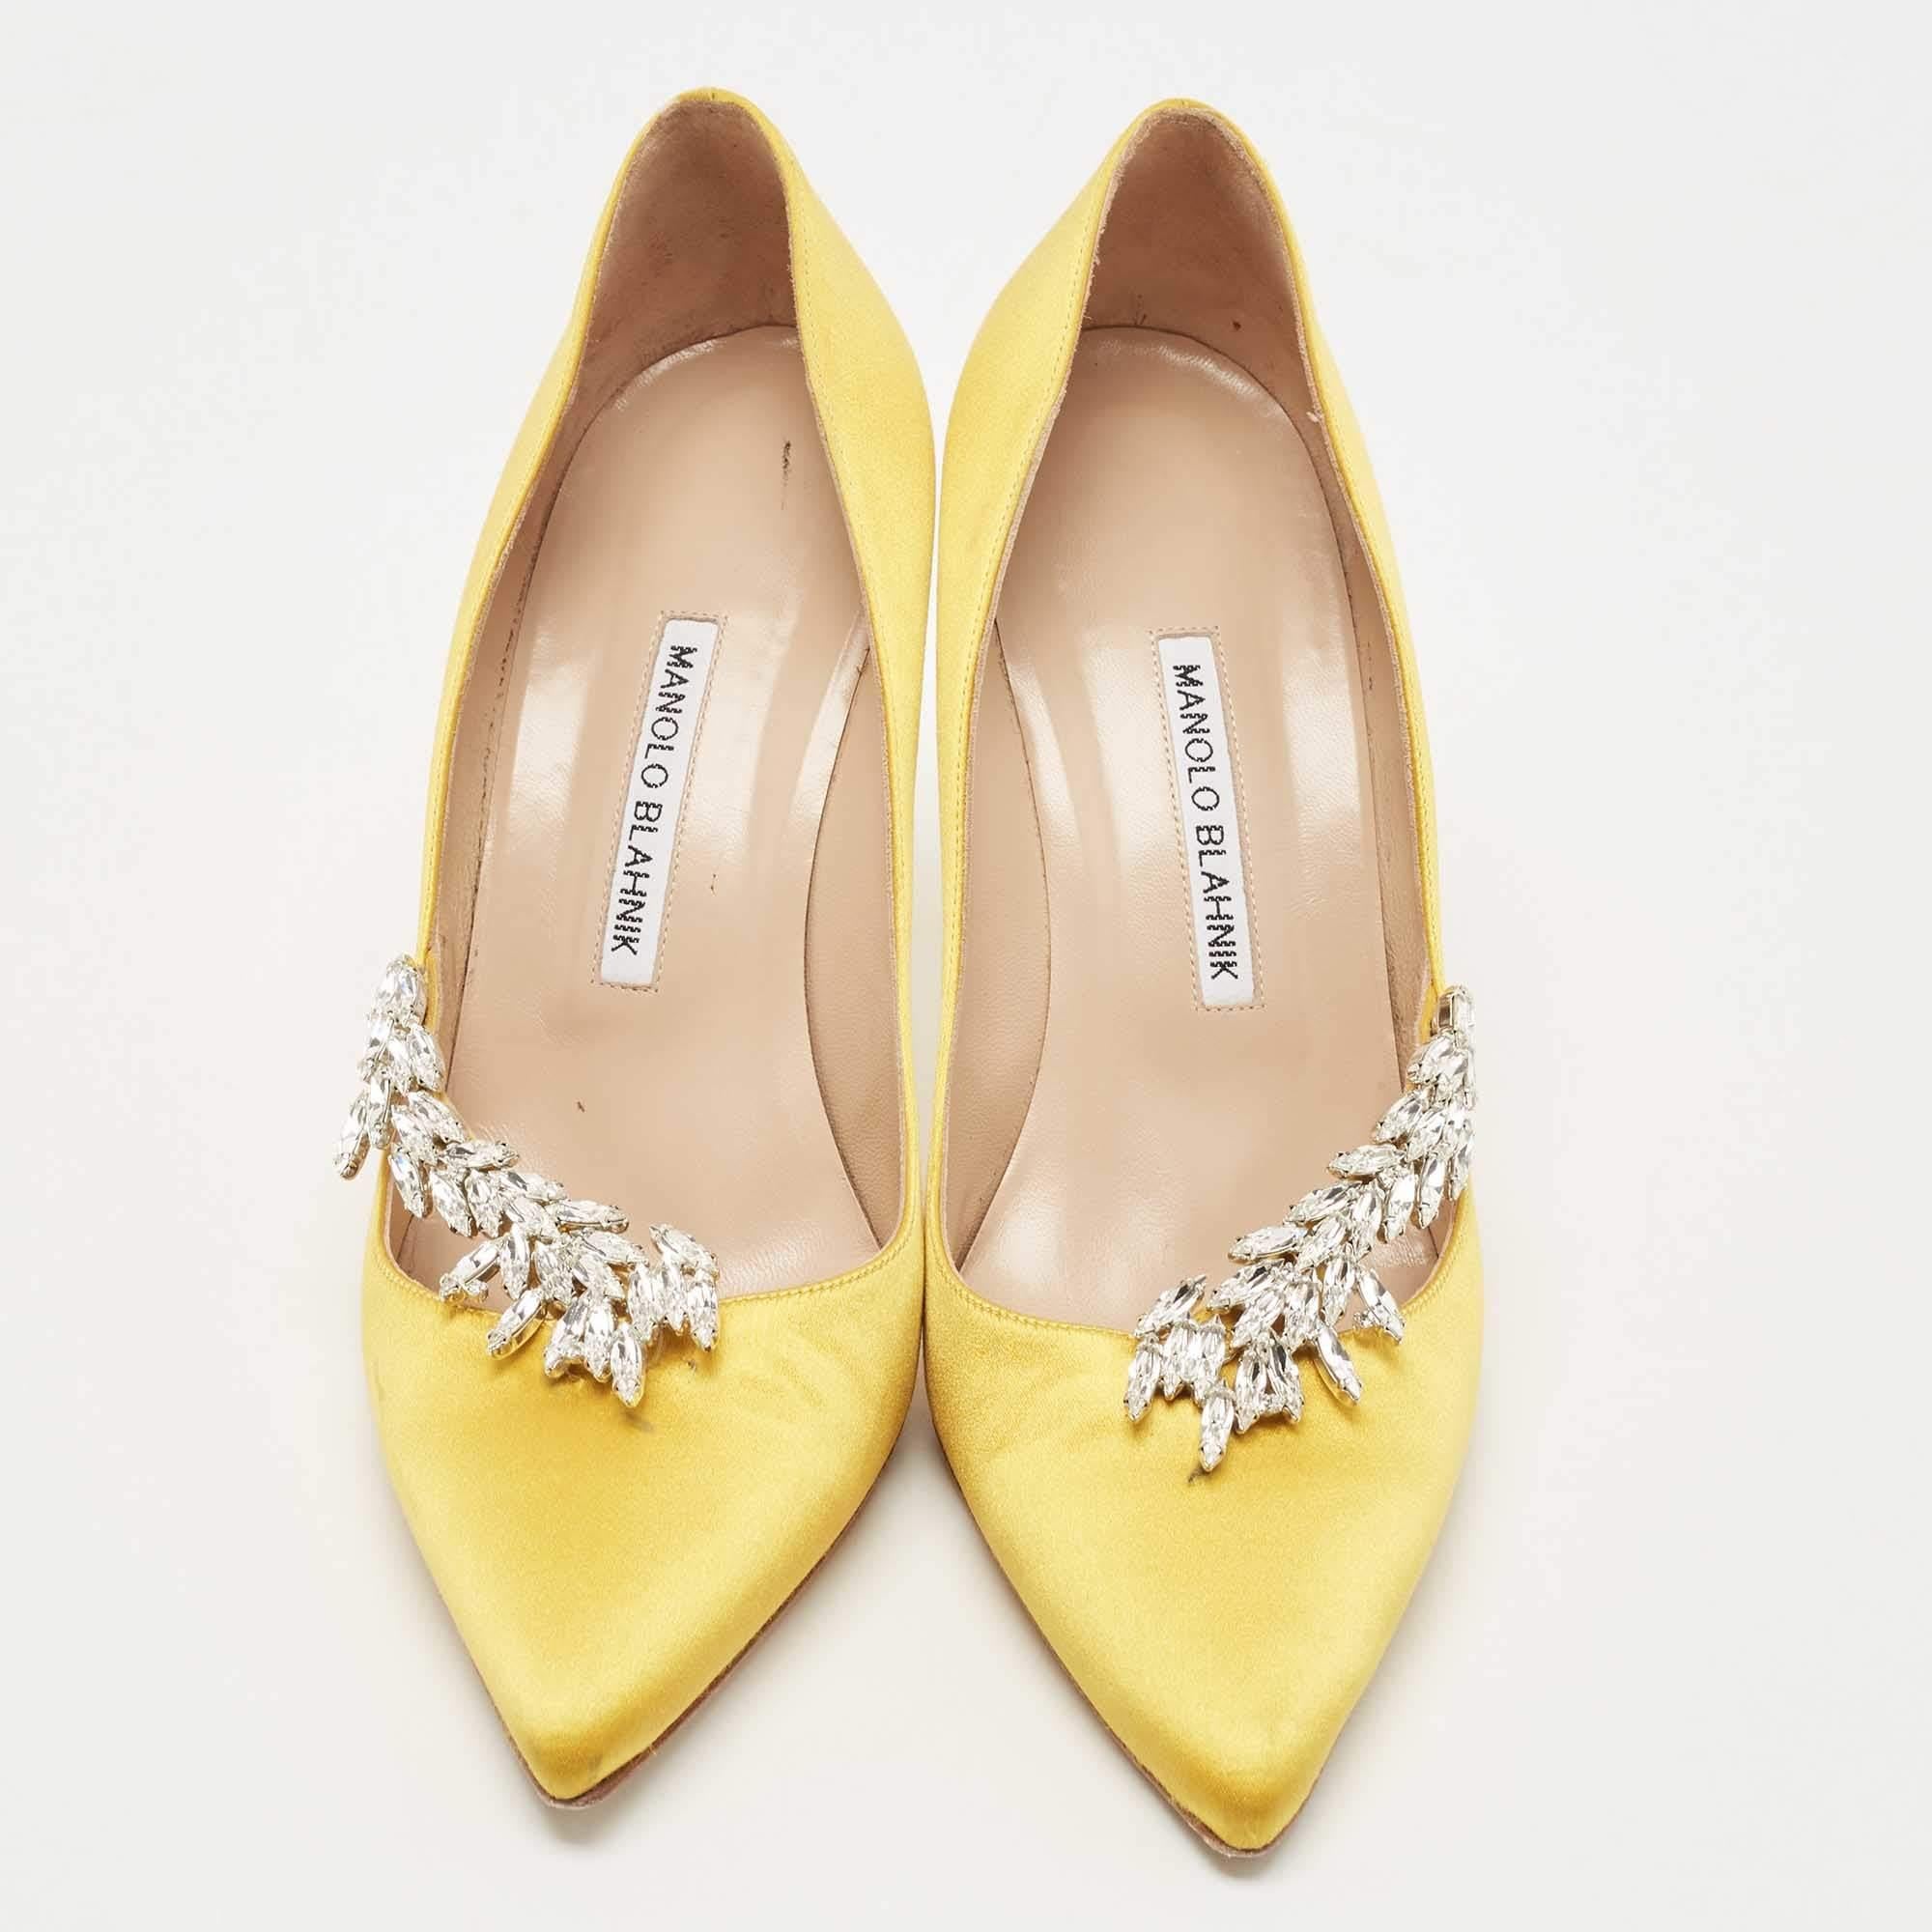 Complement your well-put-together outfit with these shoes by Manolo Blahnik. Grand and classy, they have an amazing construction for enduring quality and comfortable fit.

Includes
Original Dustbag, Original Box, Info Booklet